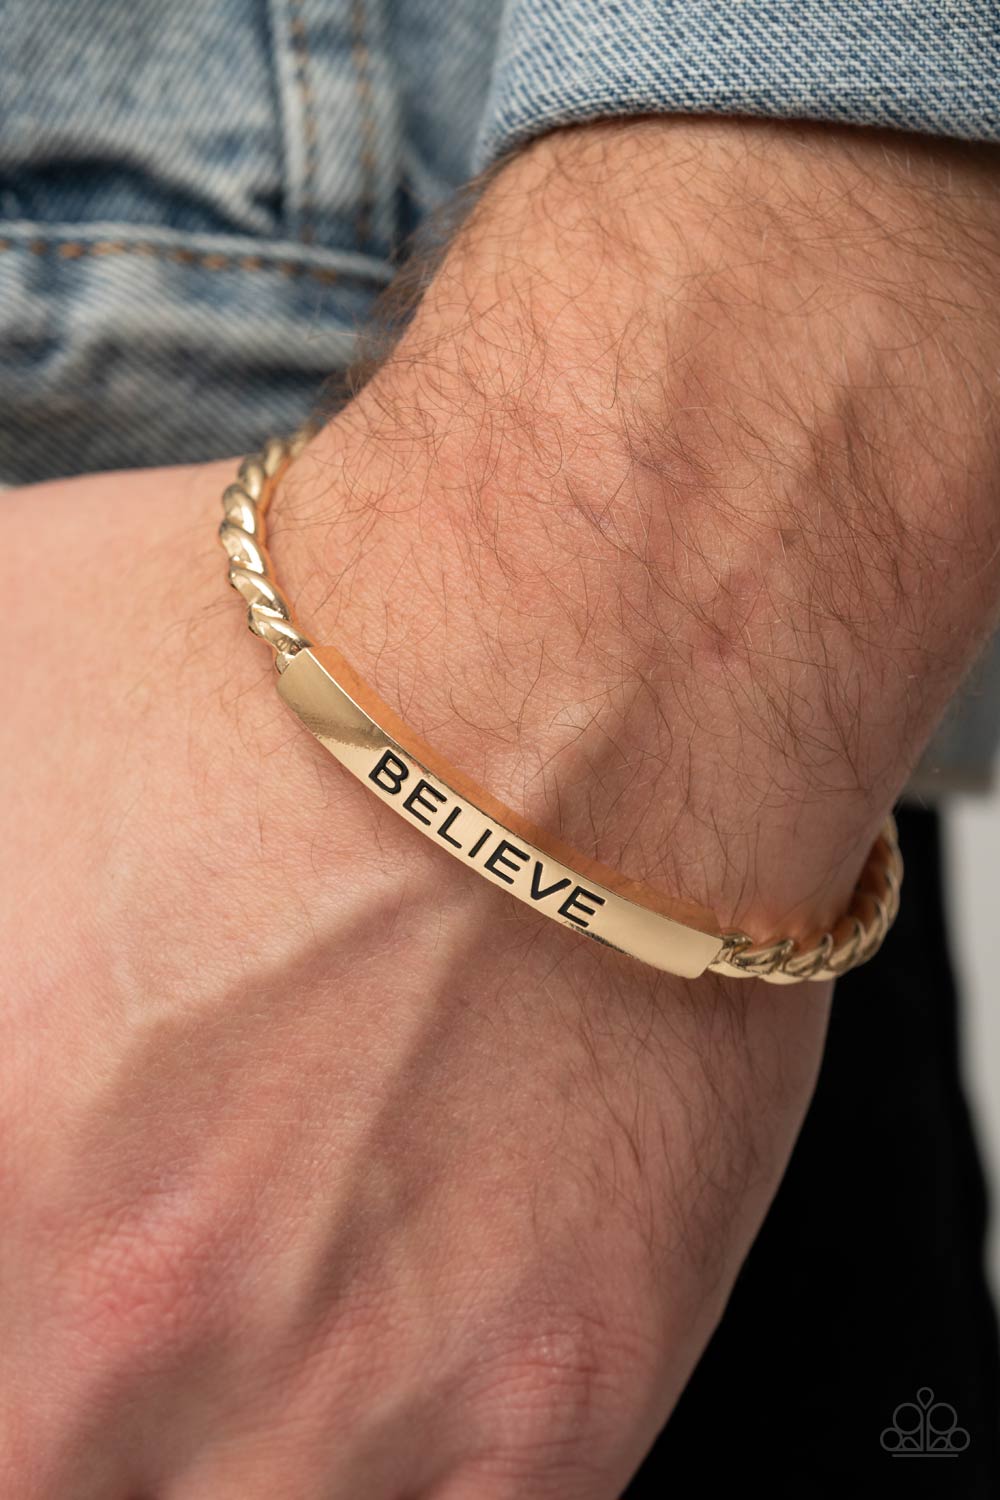 Keep Calm and Believe - Gold - Jewelz of Joy Boutique